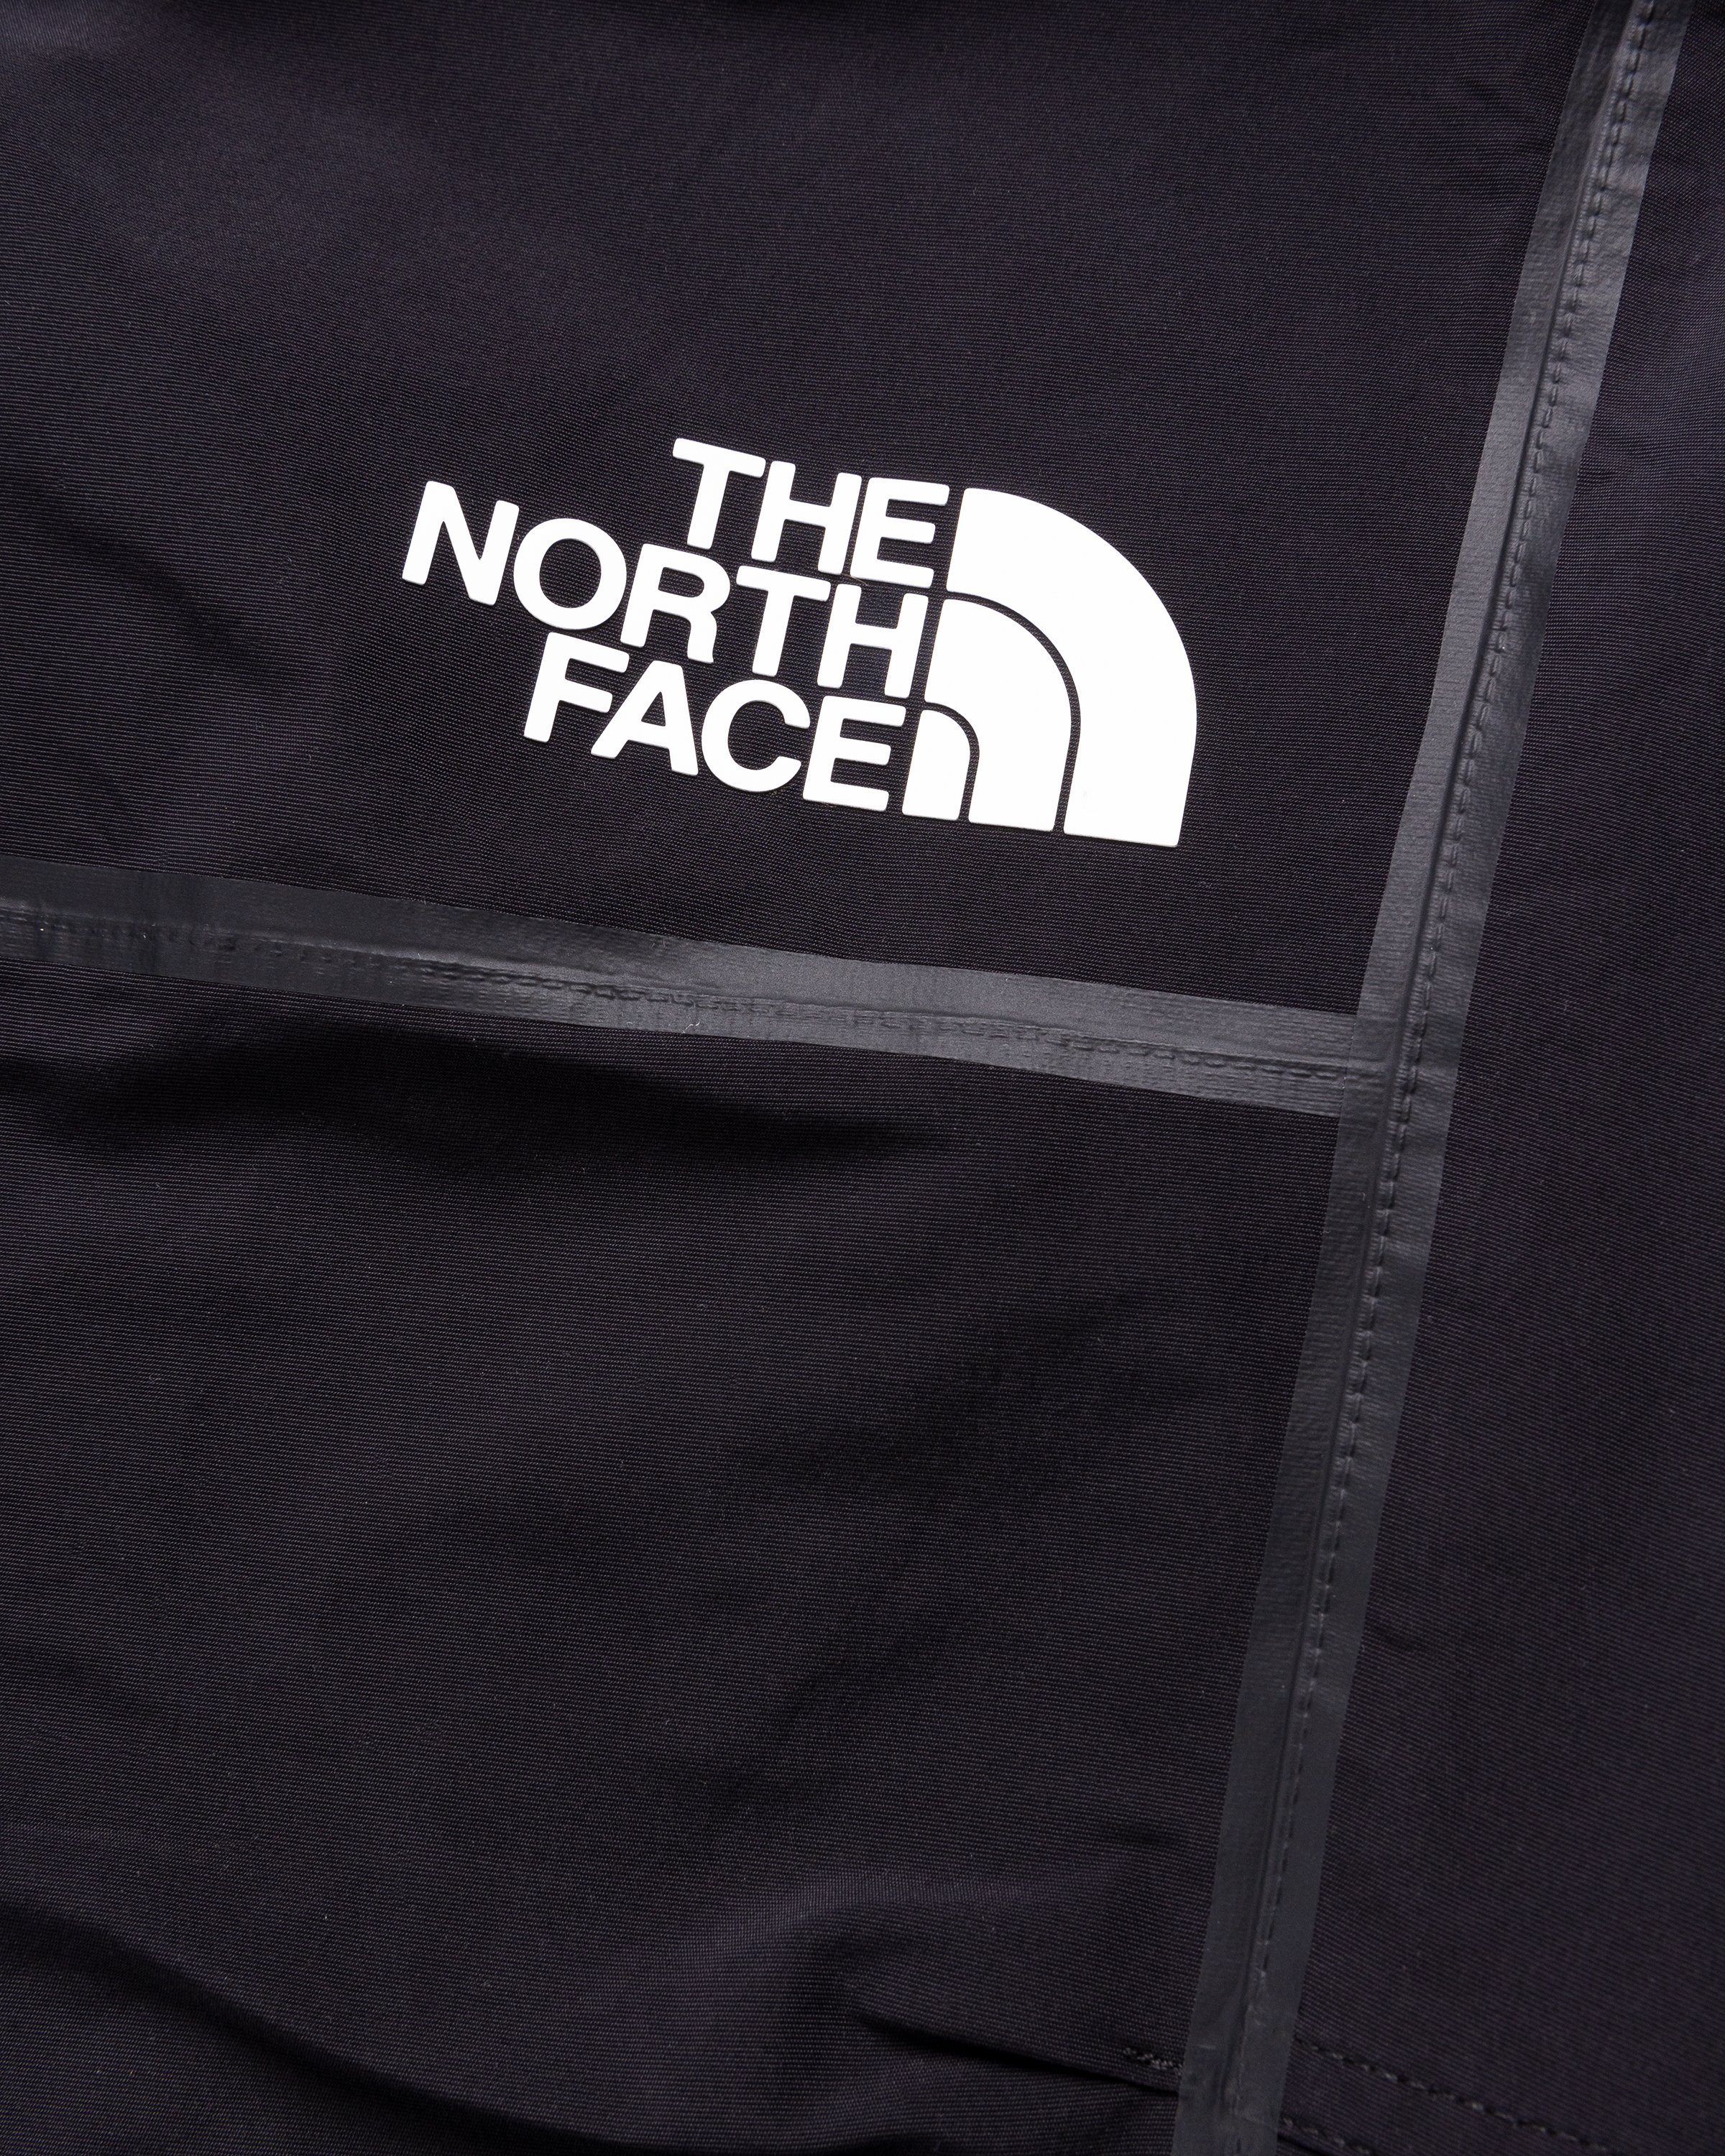 The North Face - RMST Mountain Pant Black - Clothing - Black - Image 7